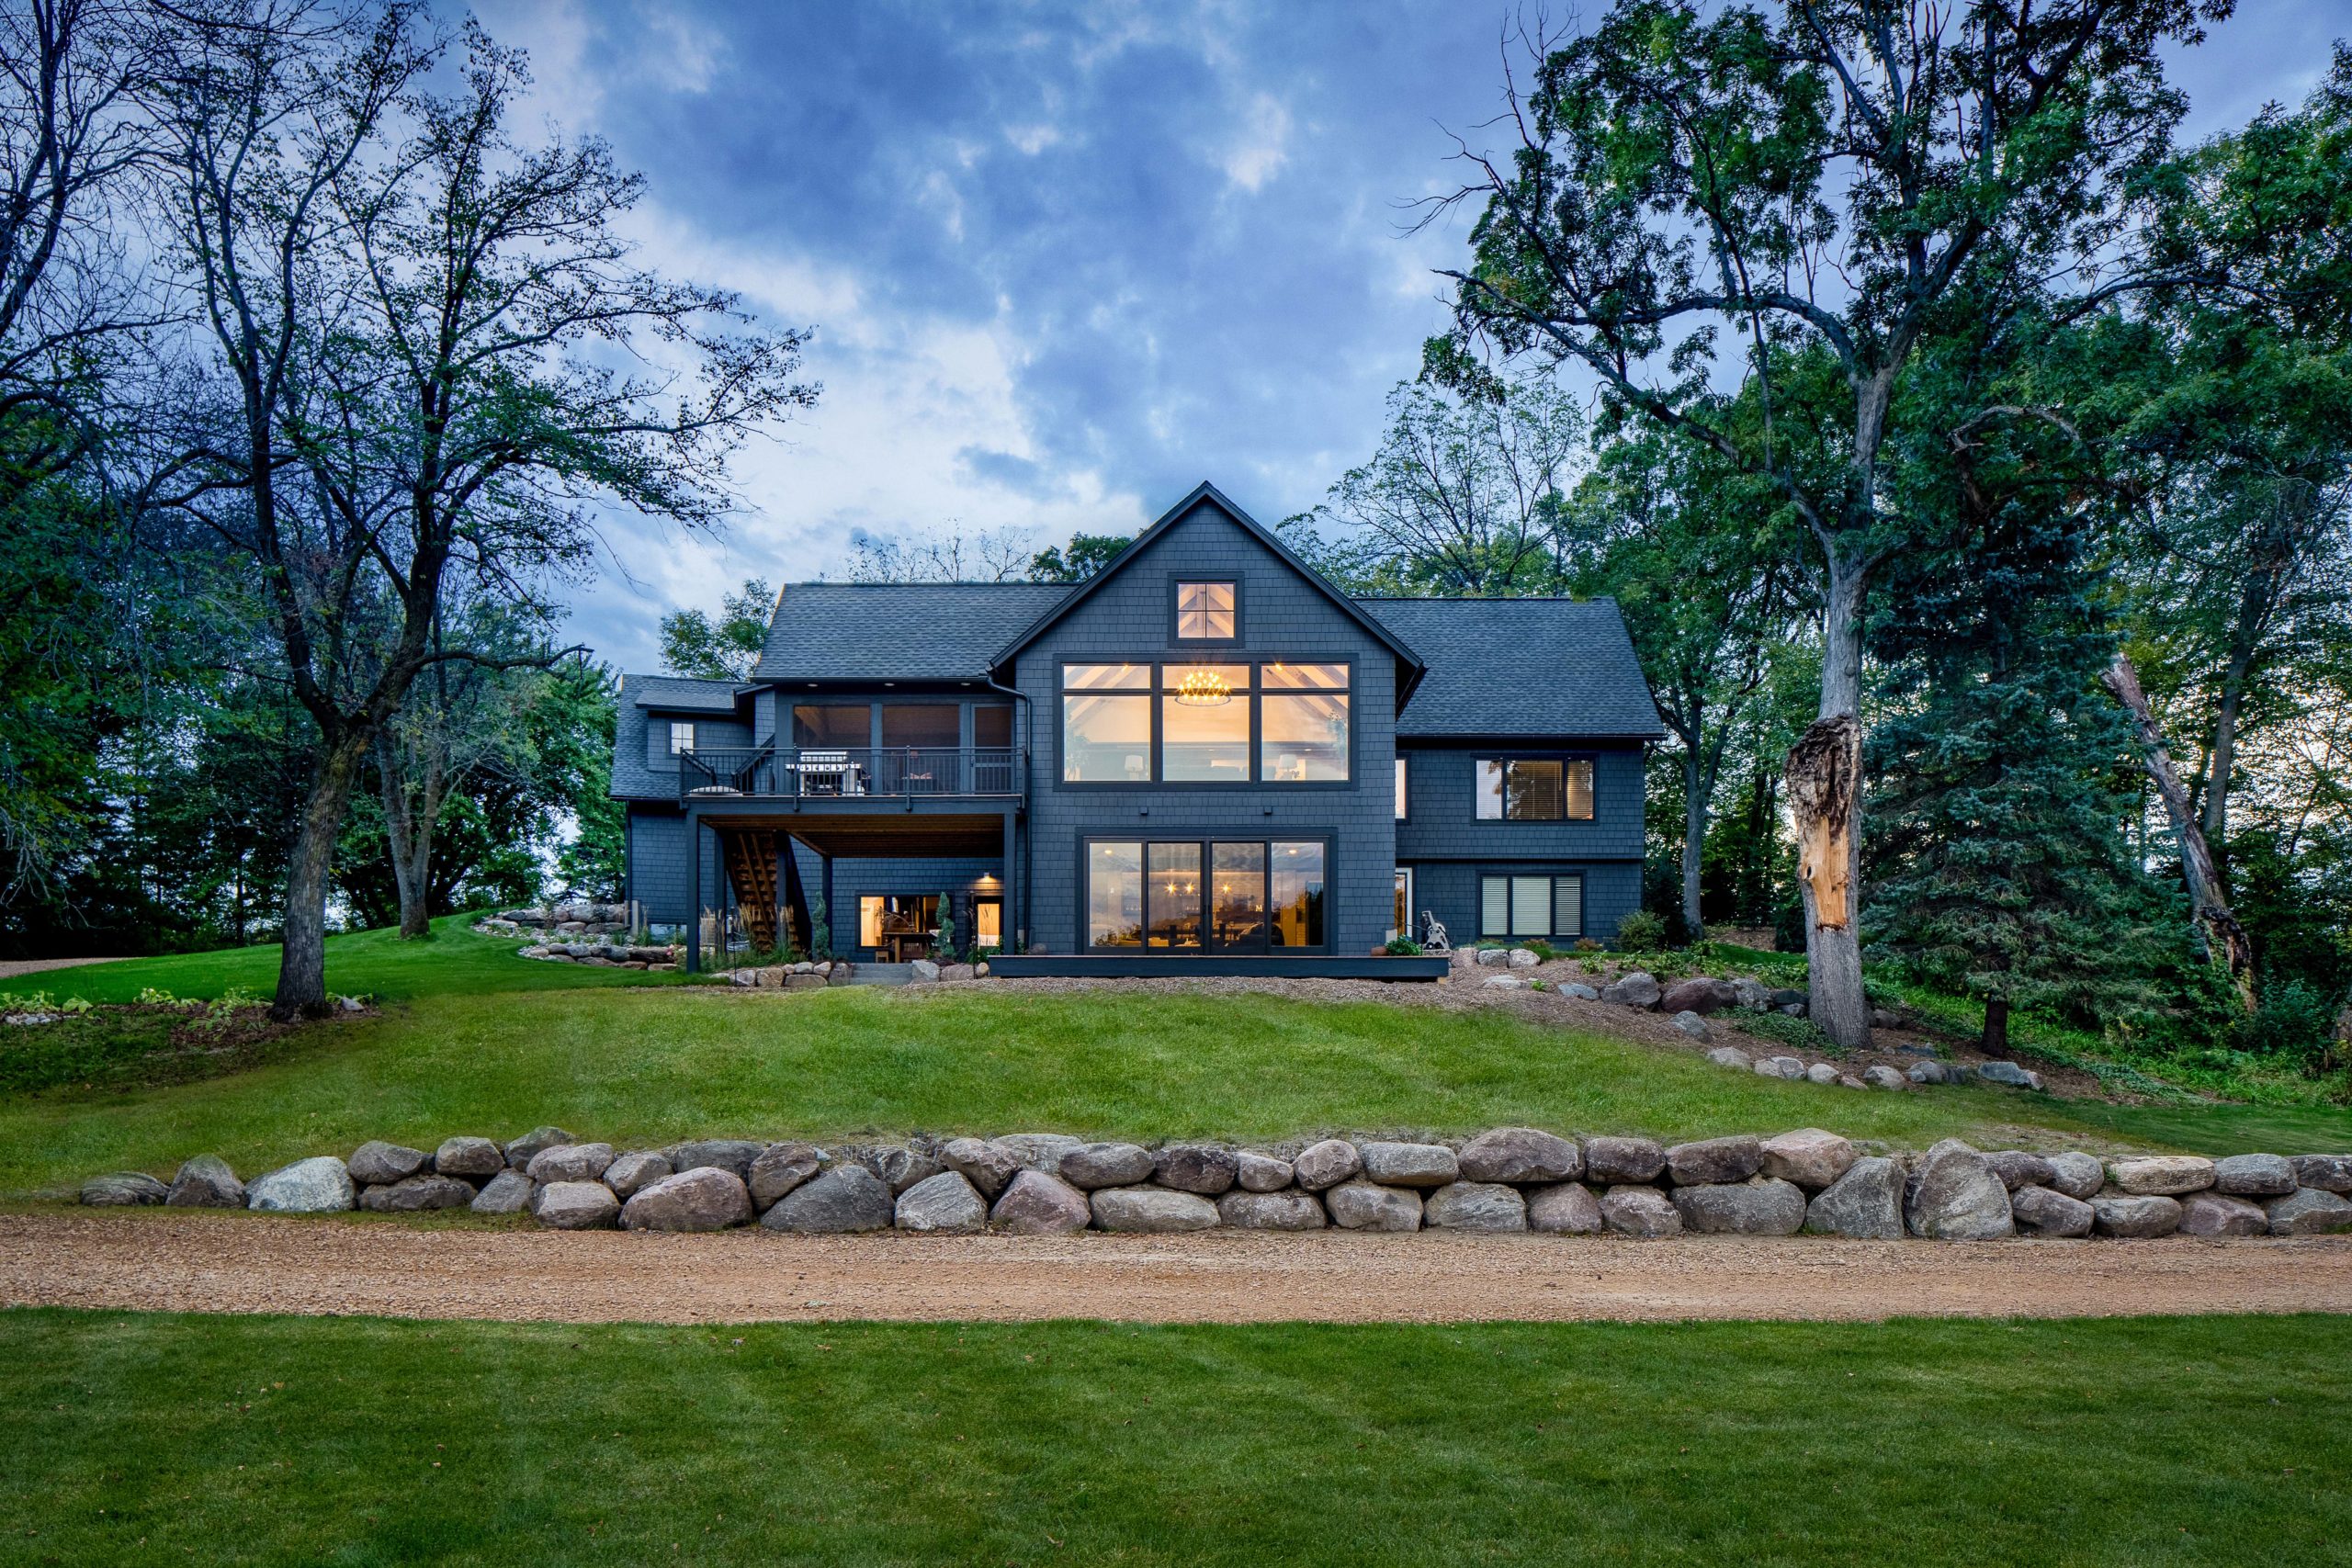 A black home with a large rock in front of it.